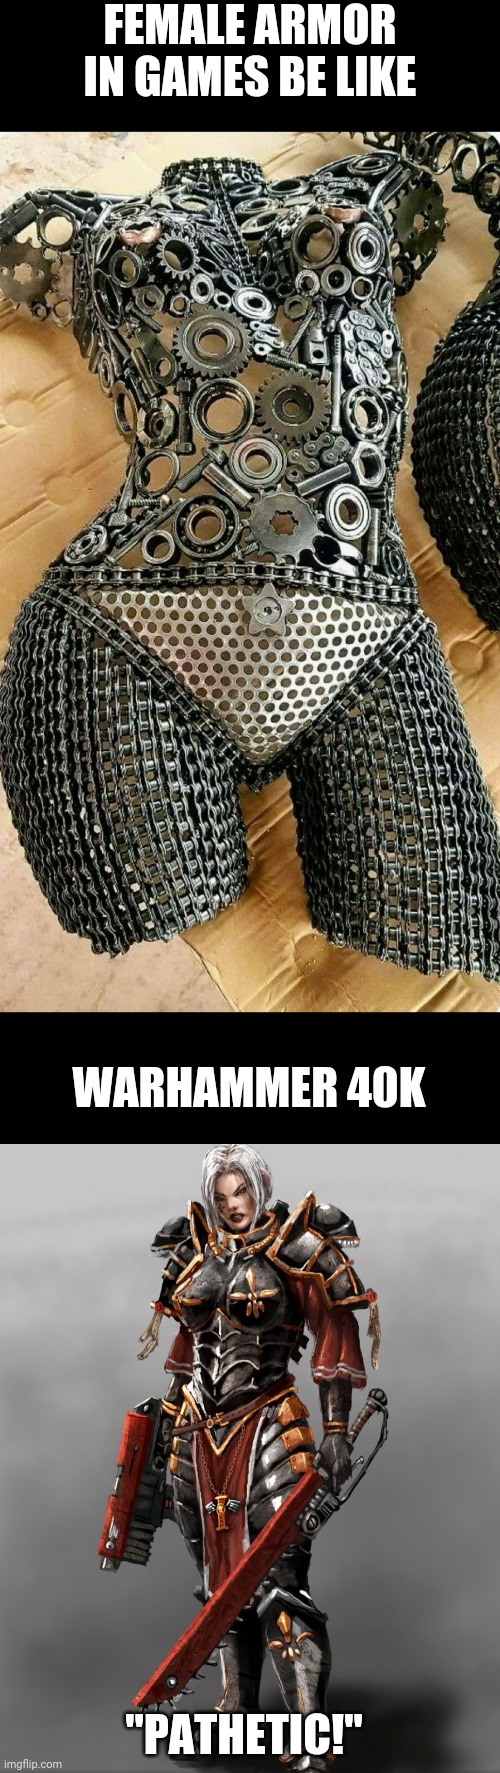 Nuns with guns | FEMALE ARMOR IN GAMES BE LIKE; WARHAMMER 40K; "PATHETIC!" | image tagged in warhammer,warhammer 40k,sisters | made w/ Imgflip meme maker